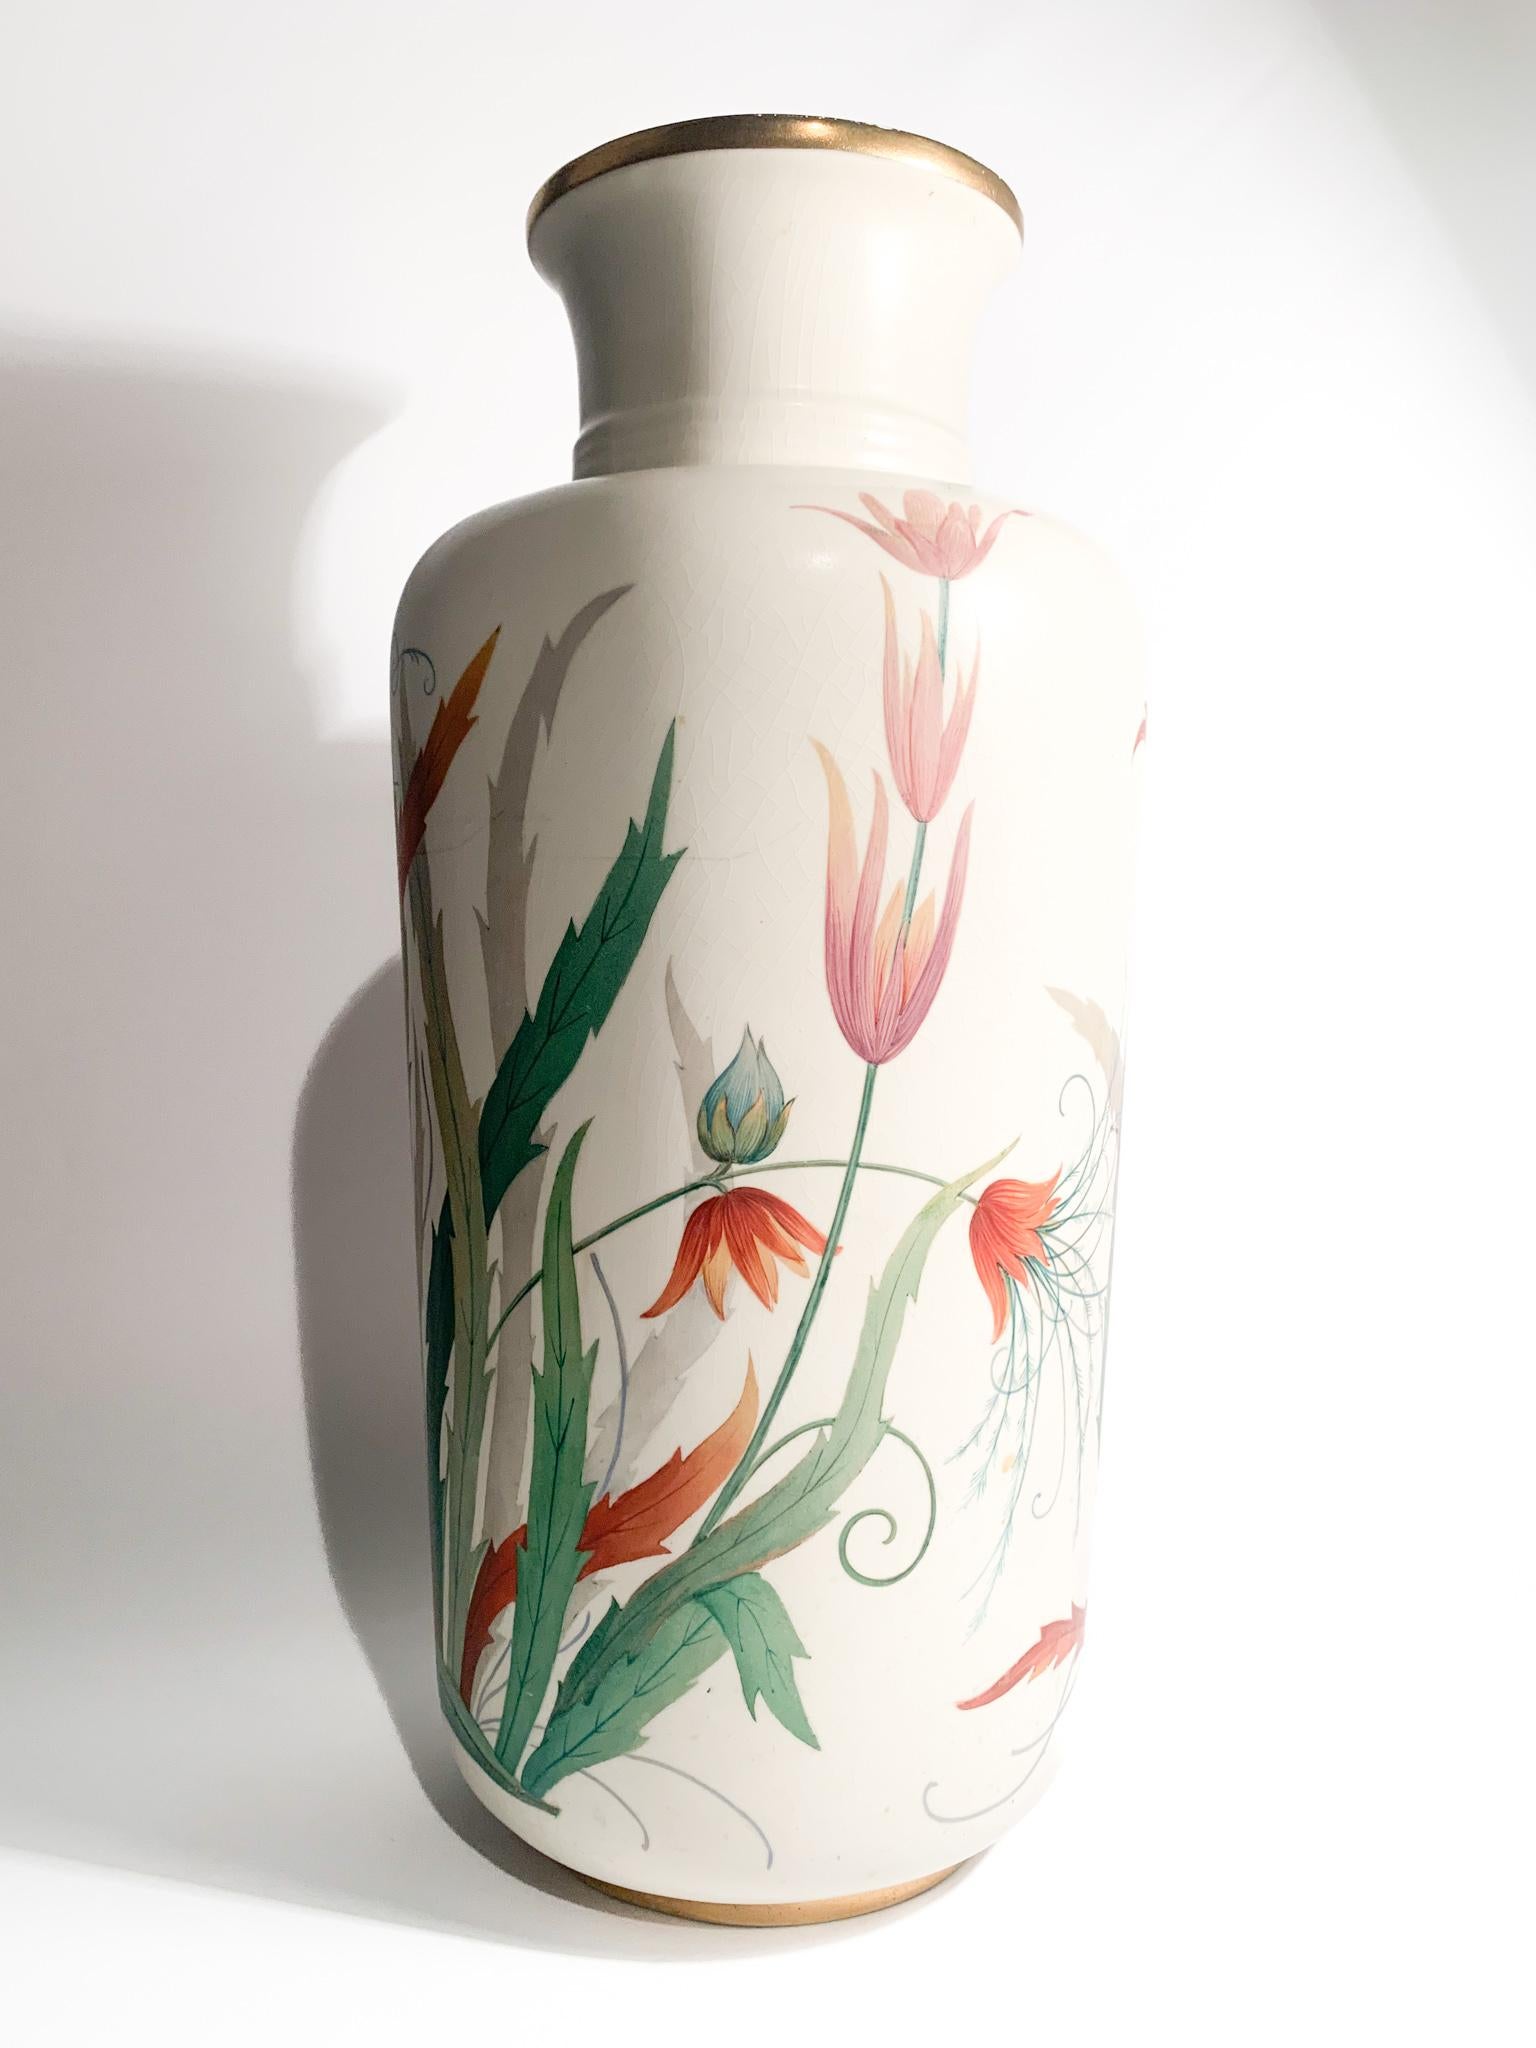 Porcelain Vase by Richard Ginori Hand Painted from the 1920s For Sale 10